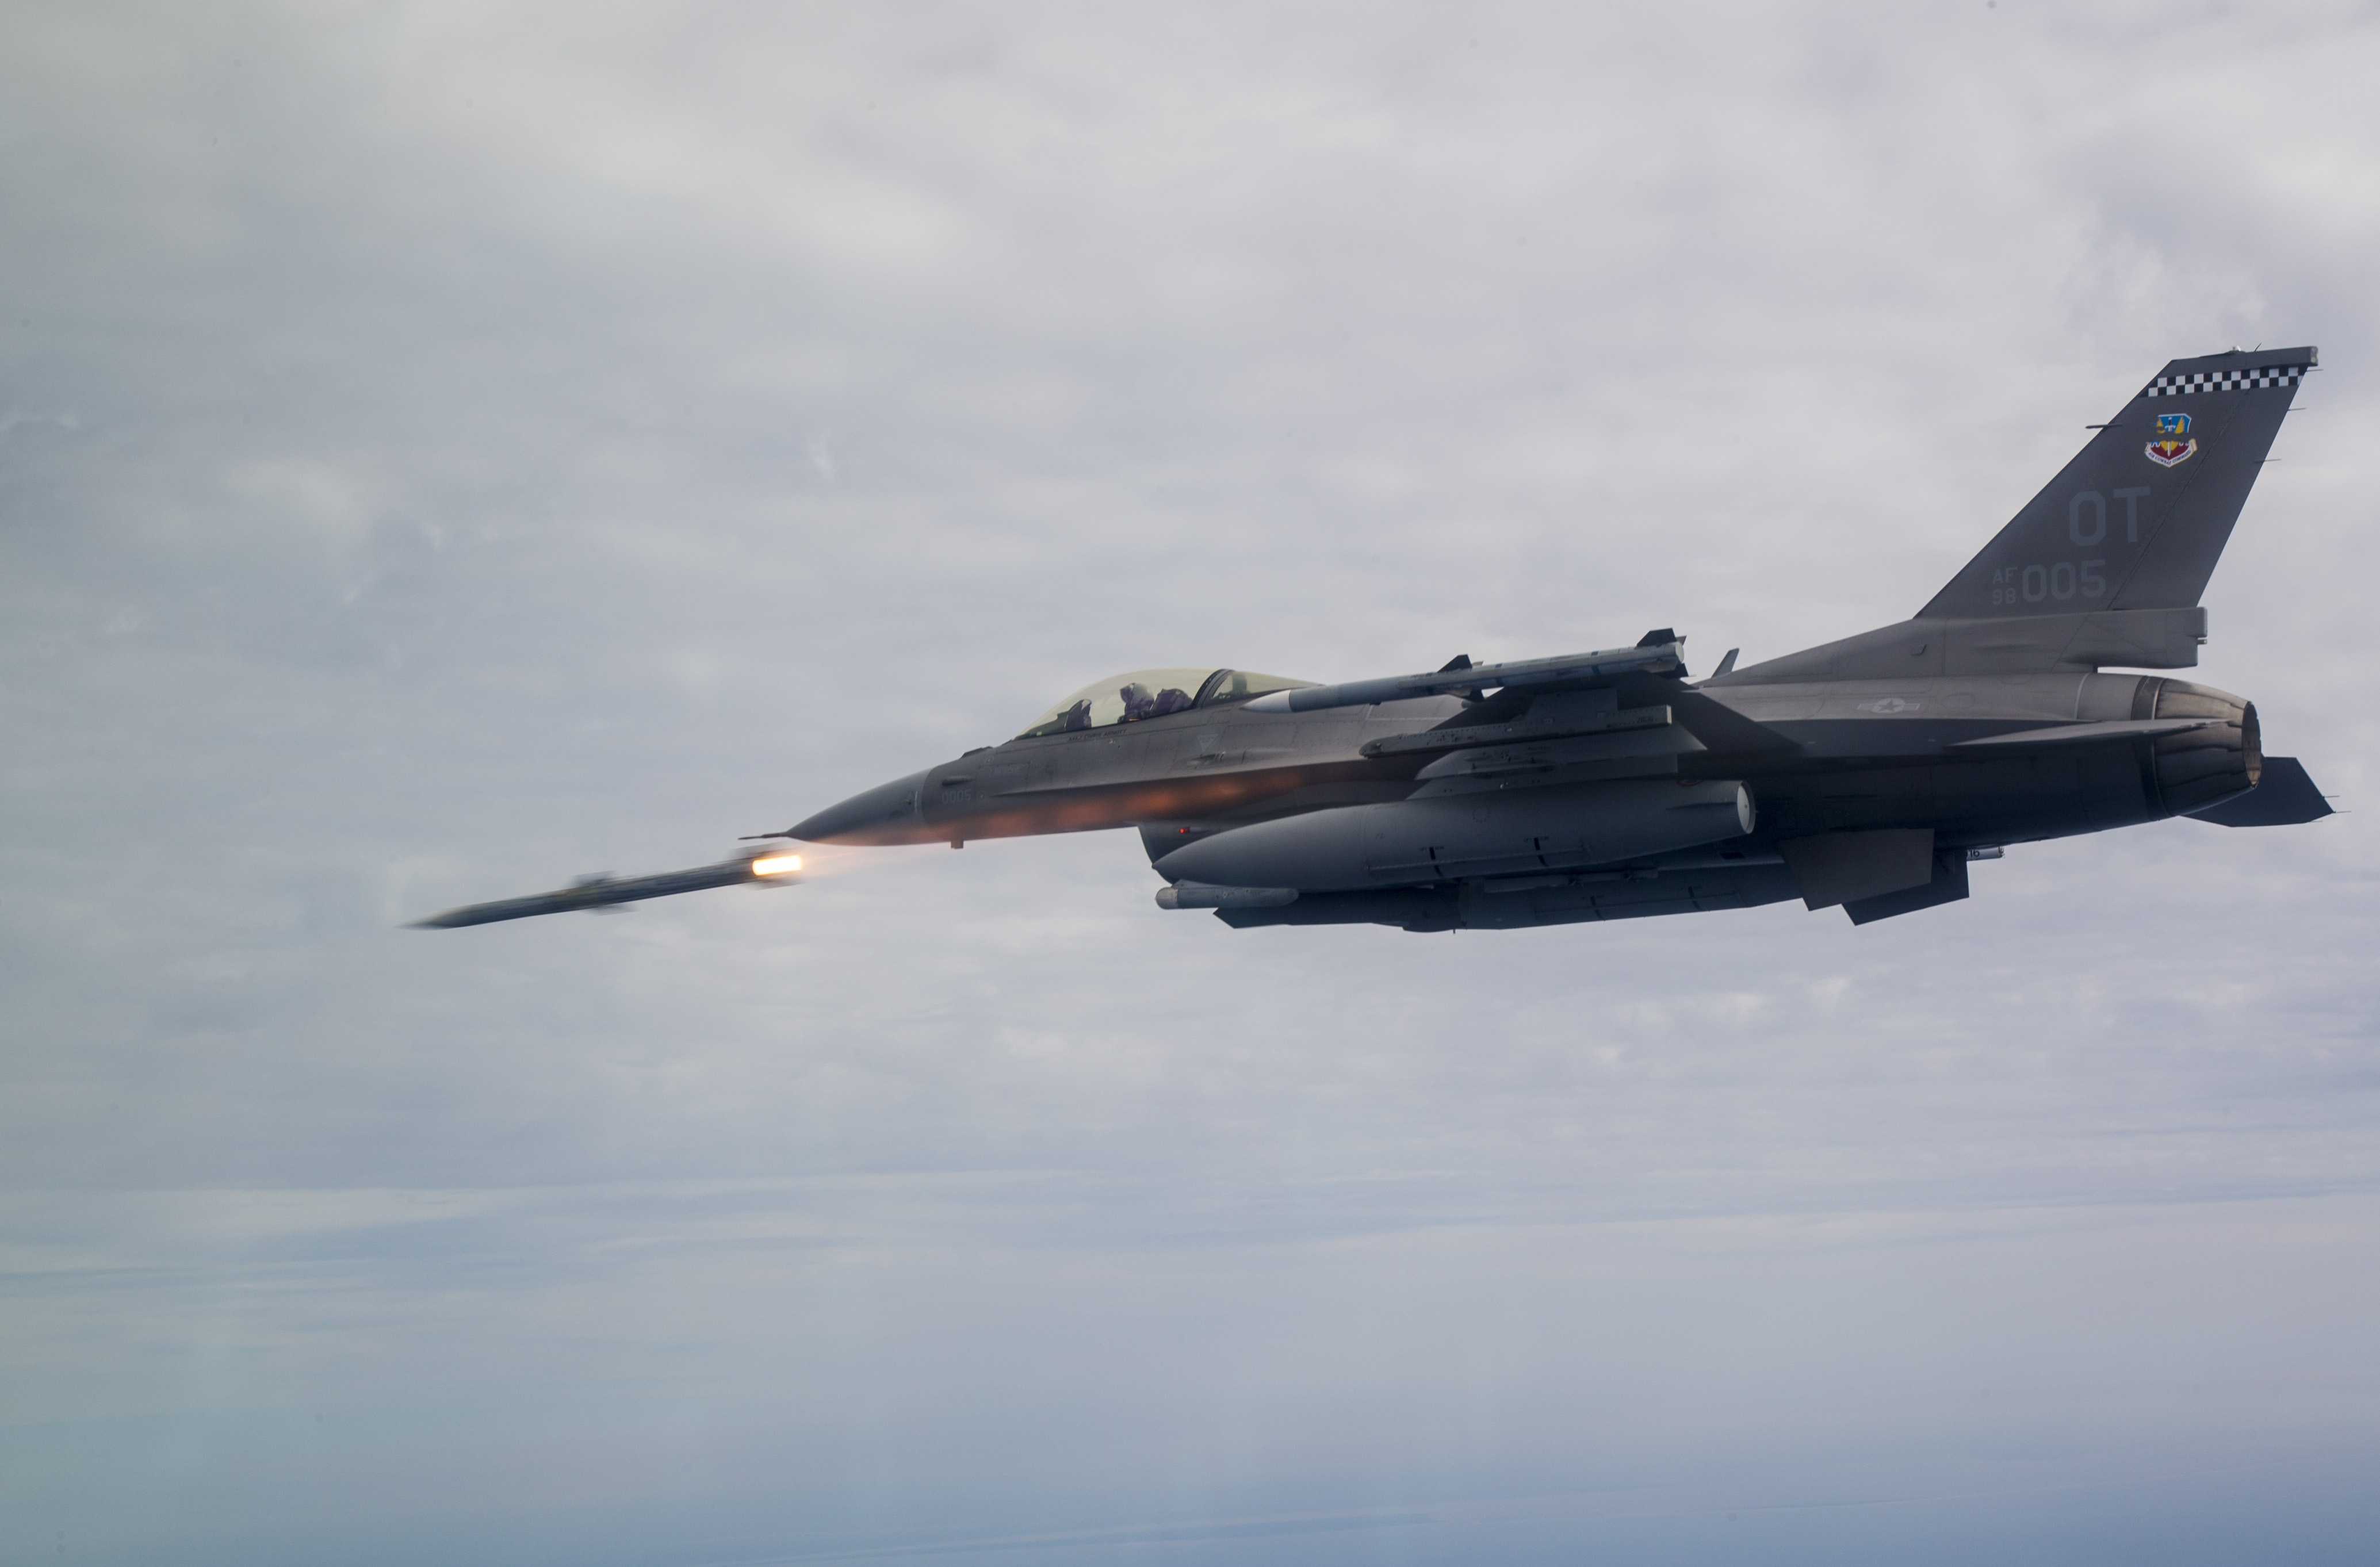 Operational Flight Program (OFP) Software Makes F-16 More Capable